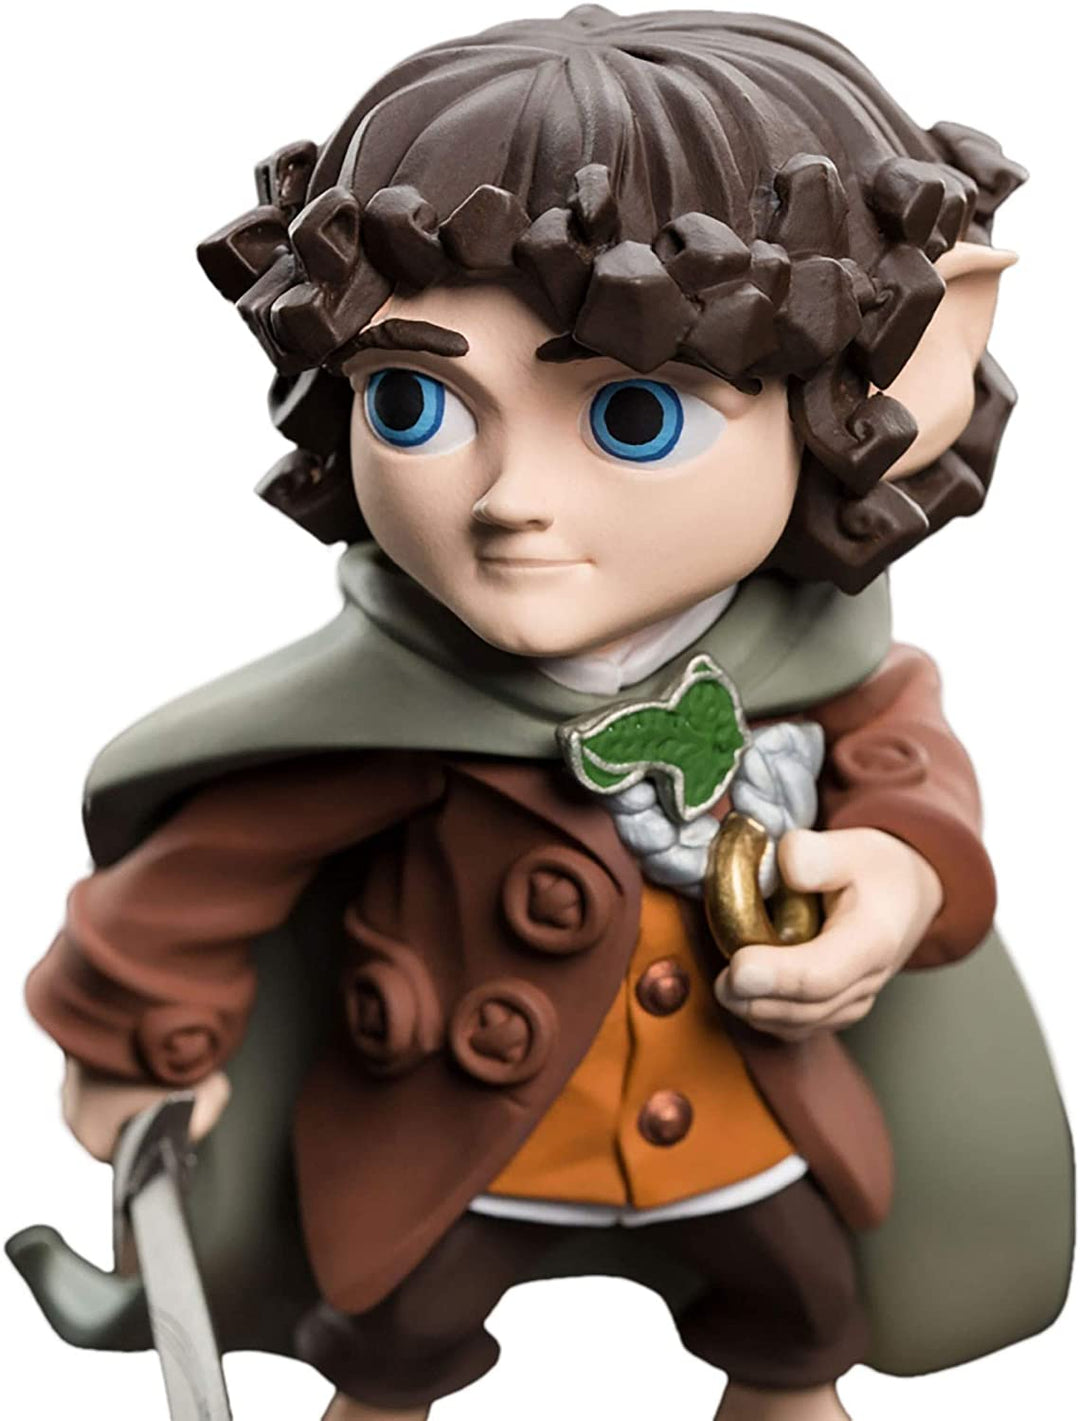 Lord of the Rings Mini Epics - Frodo Baggins